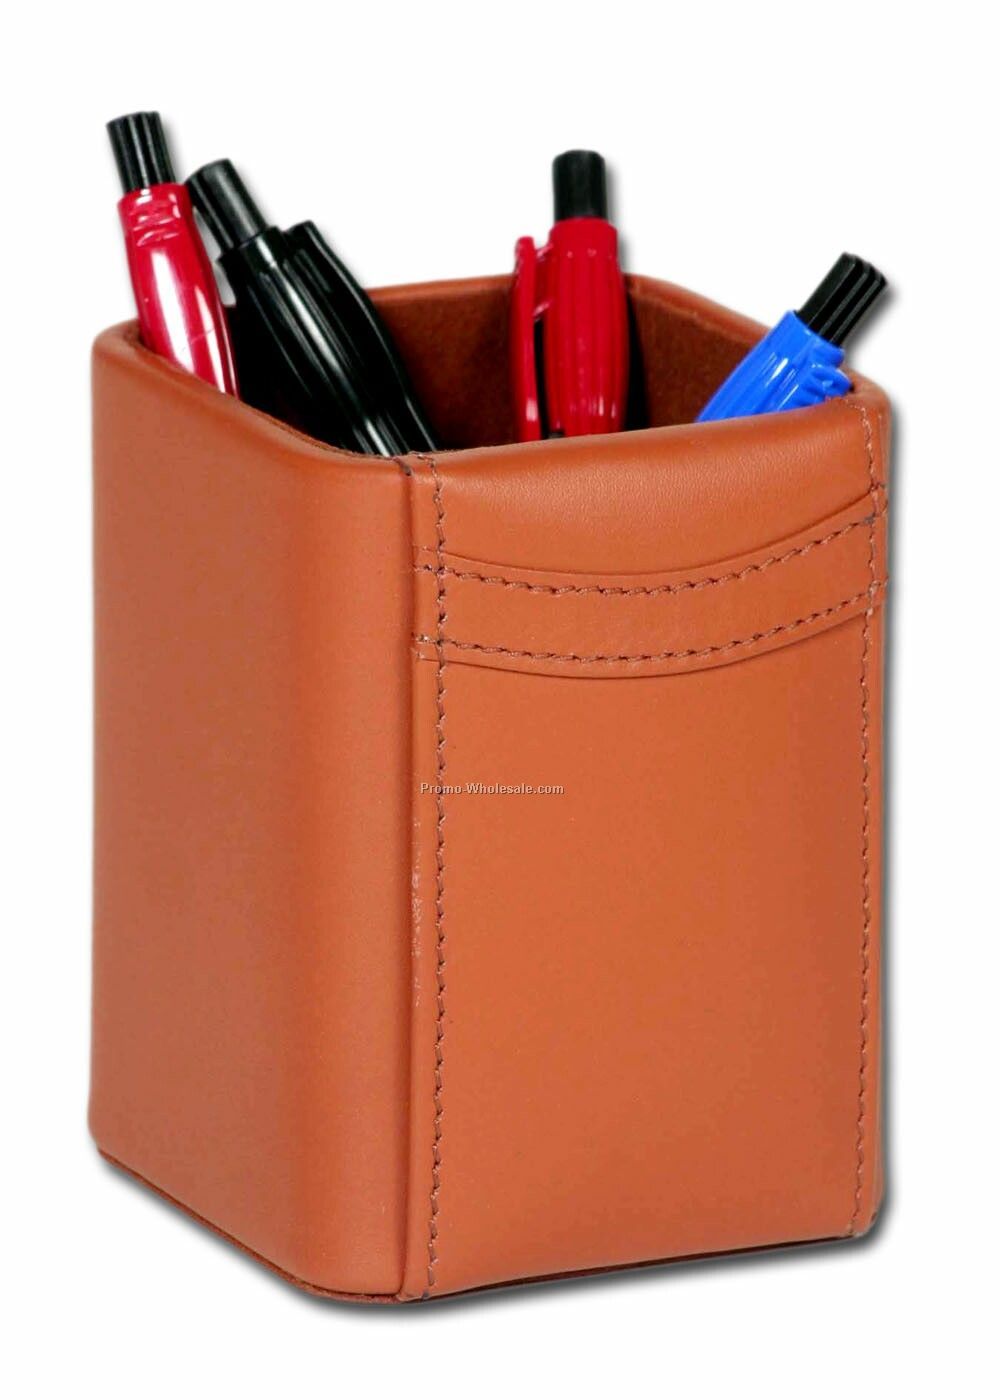 Classic Leather Pencil Cup - Tan